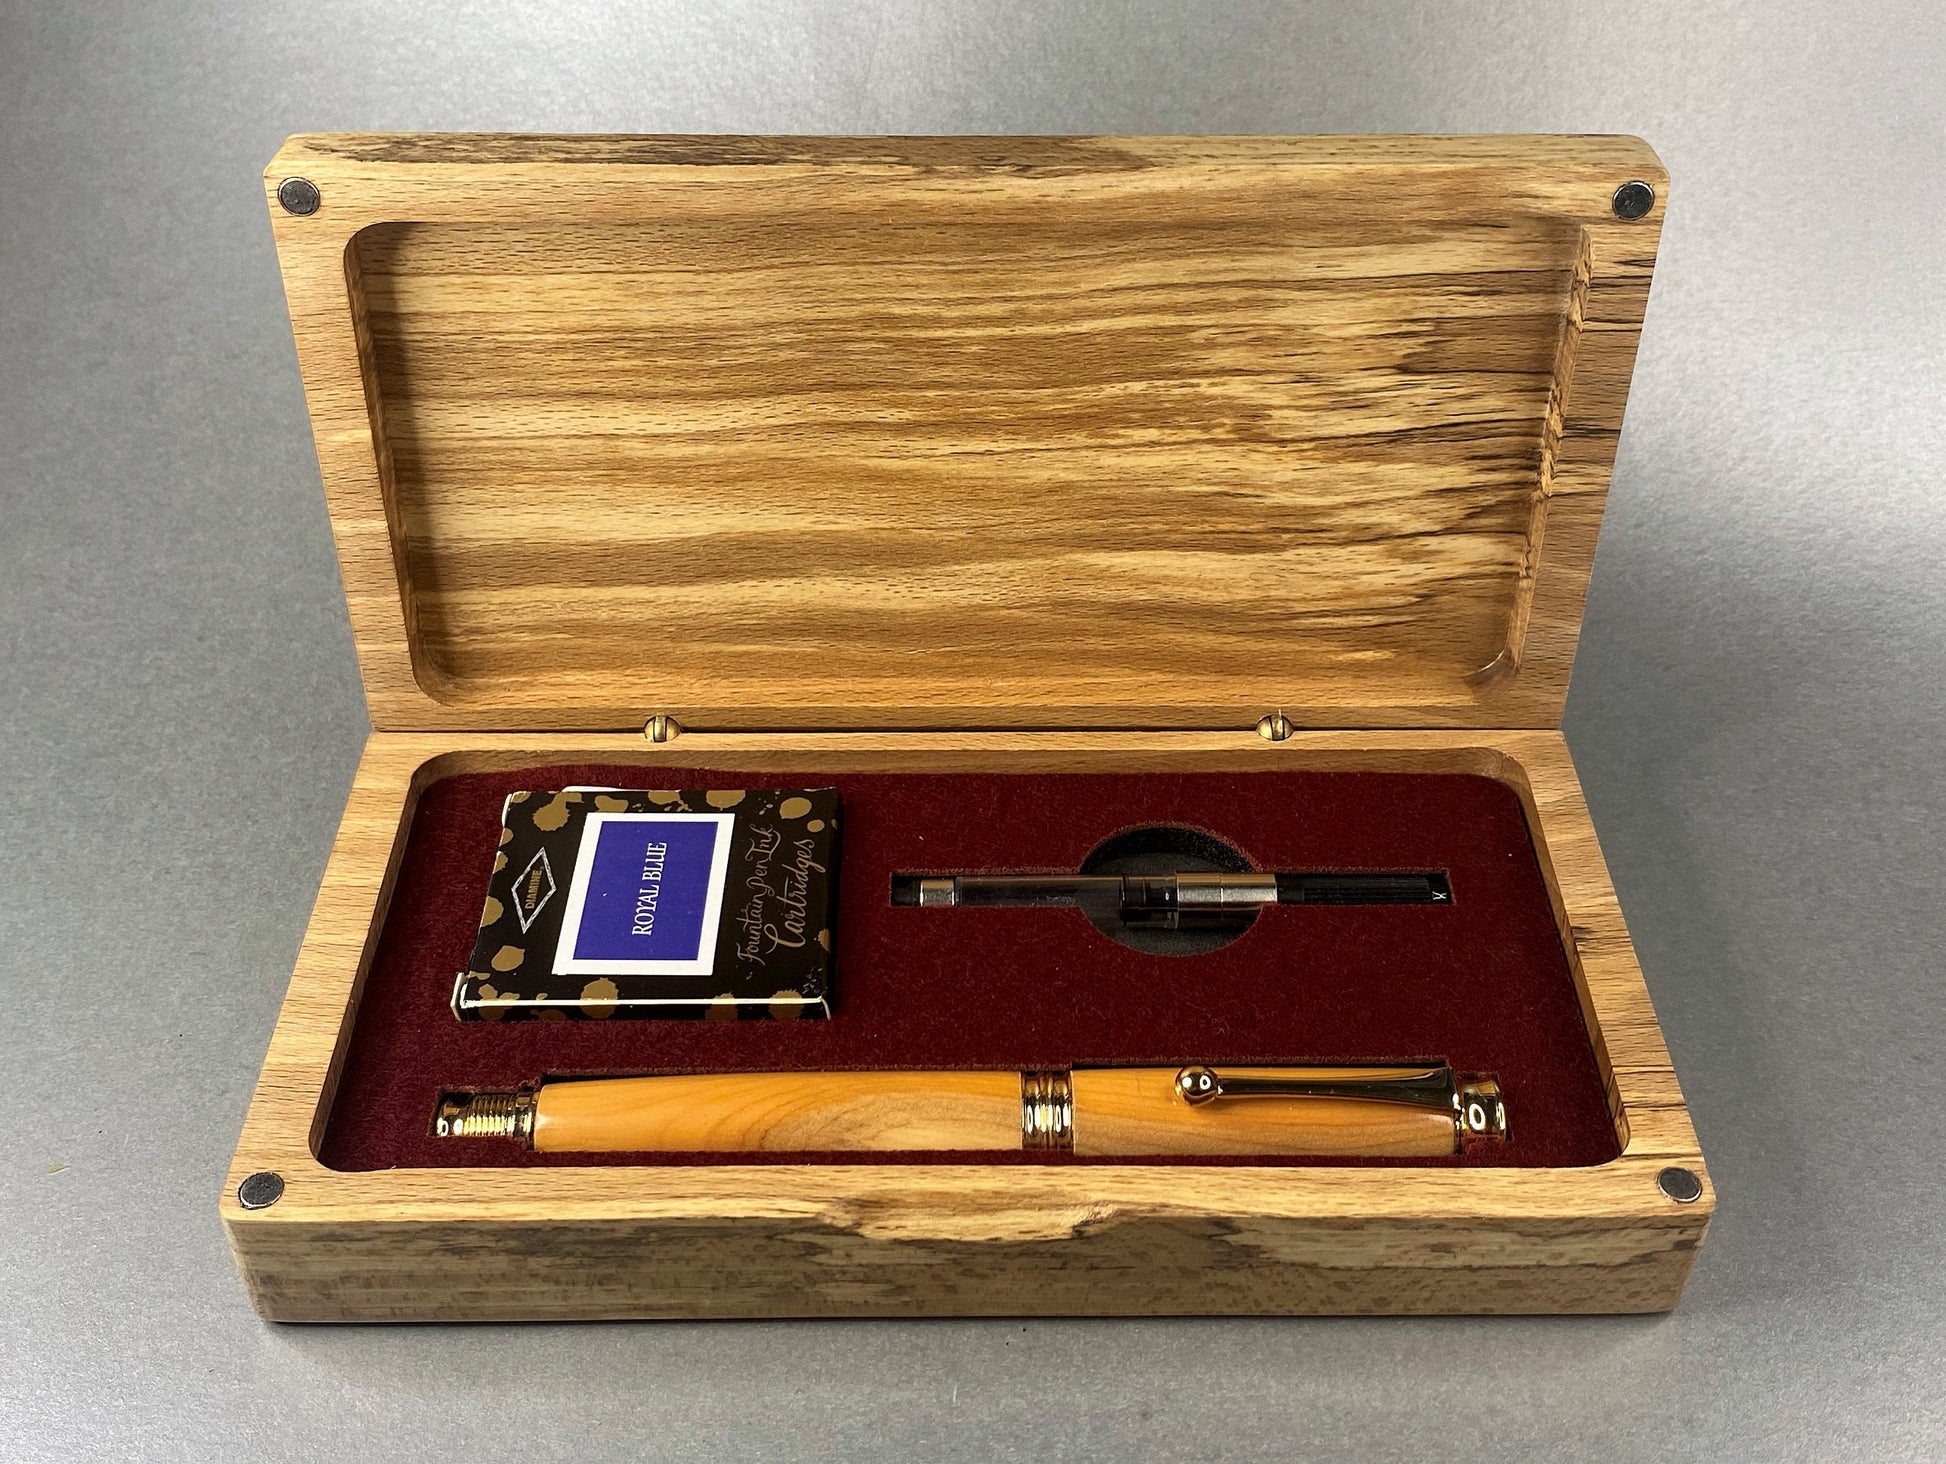 Open lidded Spalted Beech wood box showing the hand turned Fountain pen made in English Yew wood with Gold plated fittings